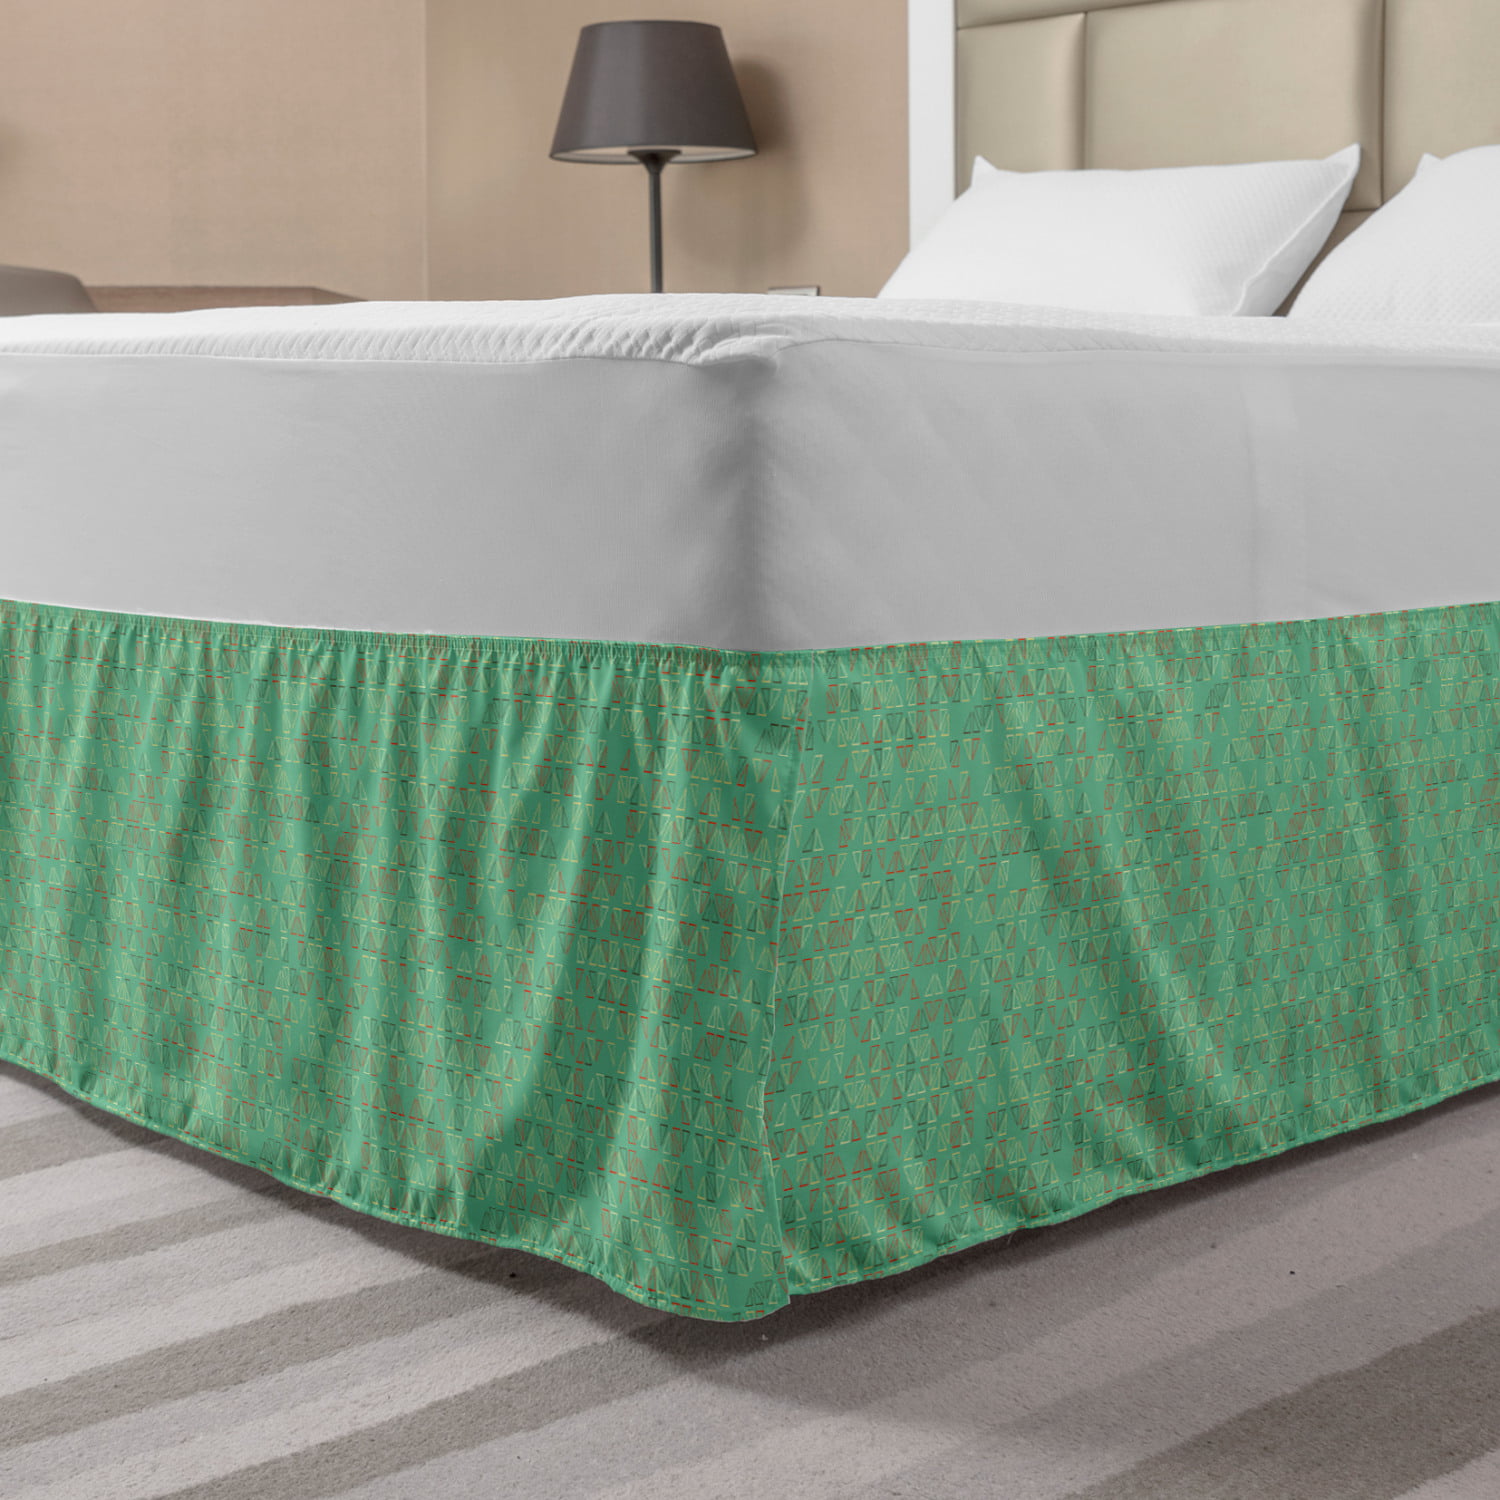 Tremendous Bedding Drop Length Bed Skirt Organic Cotton US Queen Size All Color 